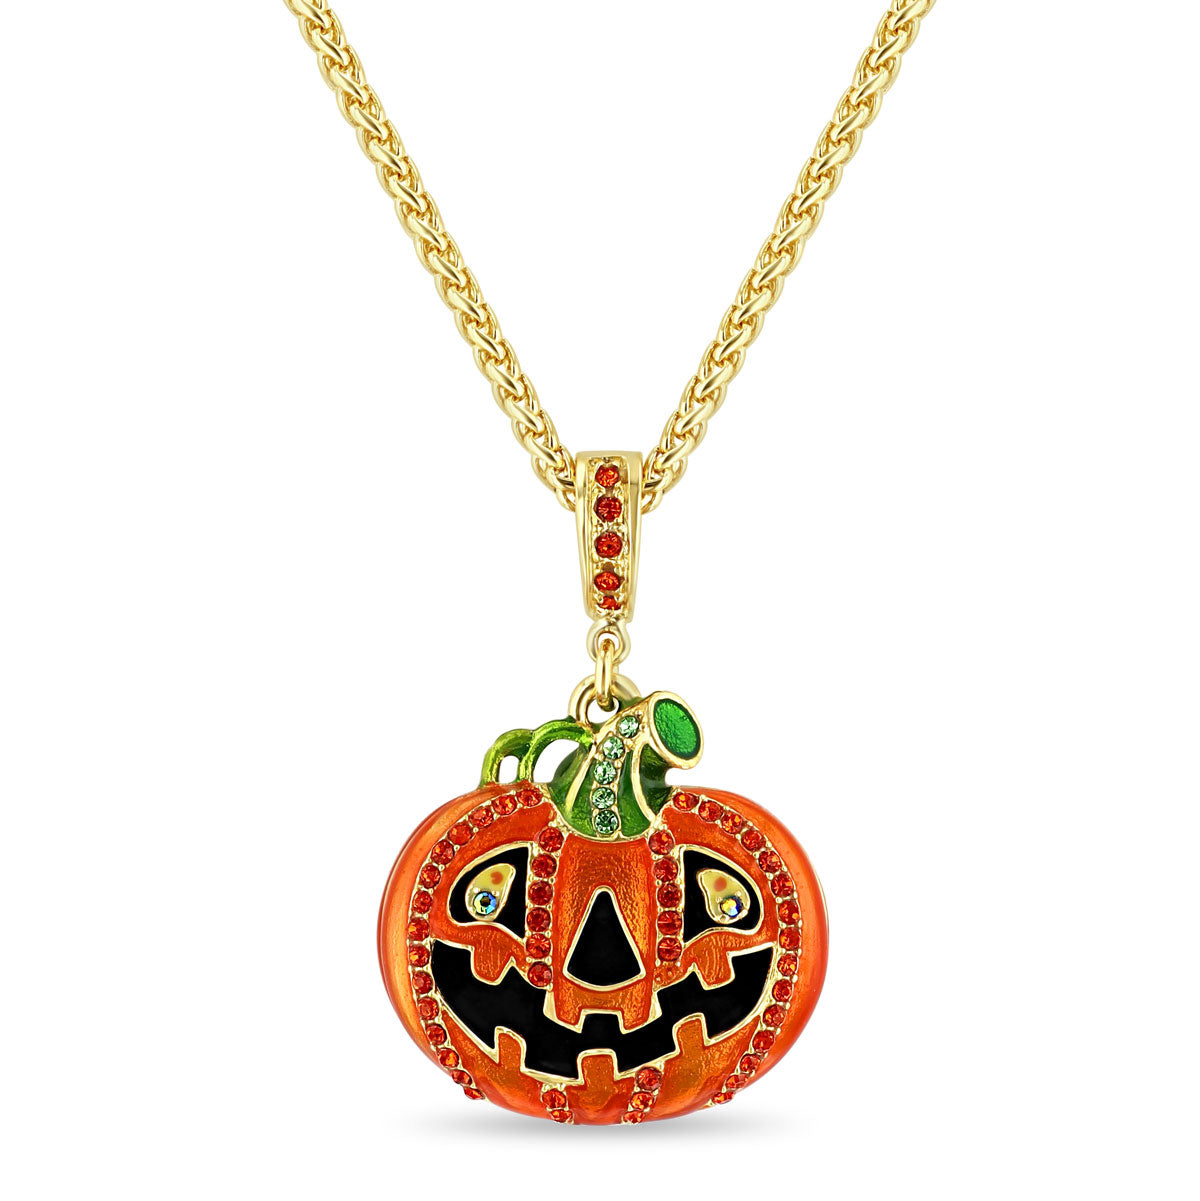 Jack O' Lantern Halloween Enhancer Charm by Ritzy Couture DeLuxe -18k Gold Plate